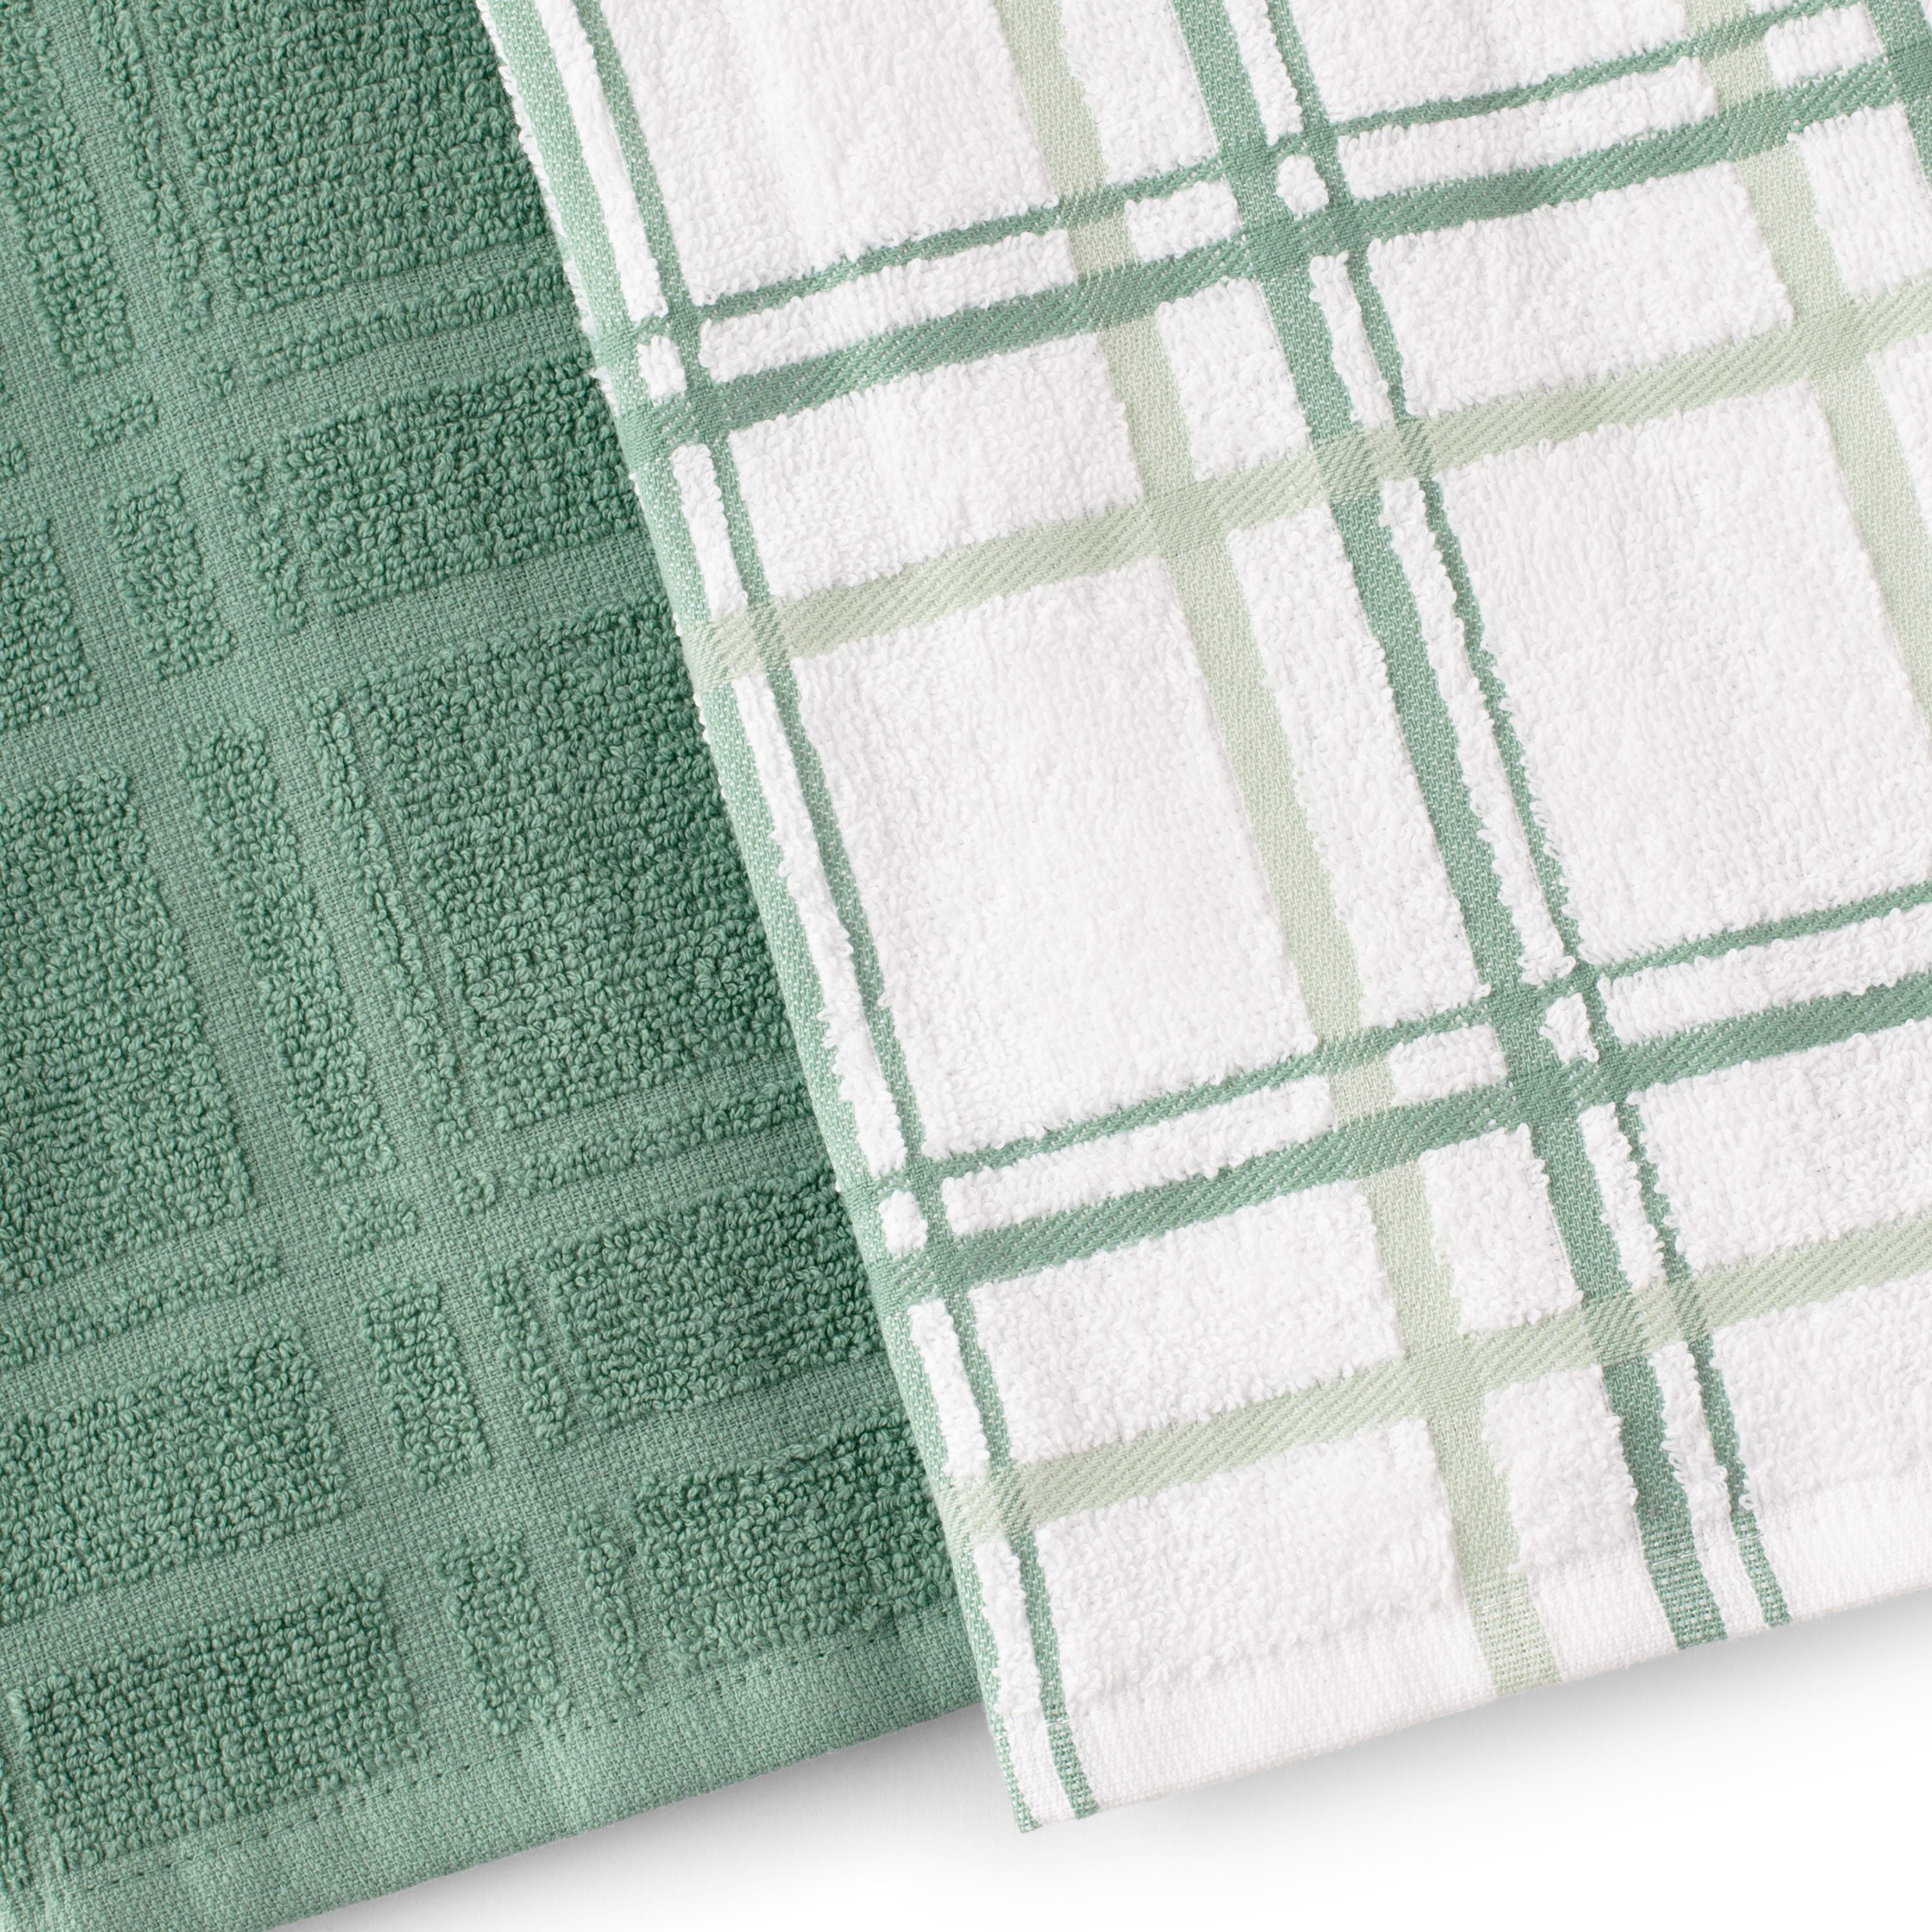 Kohl's Cares Green Kitchen Towels